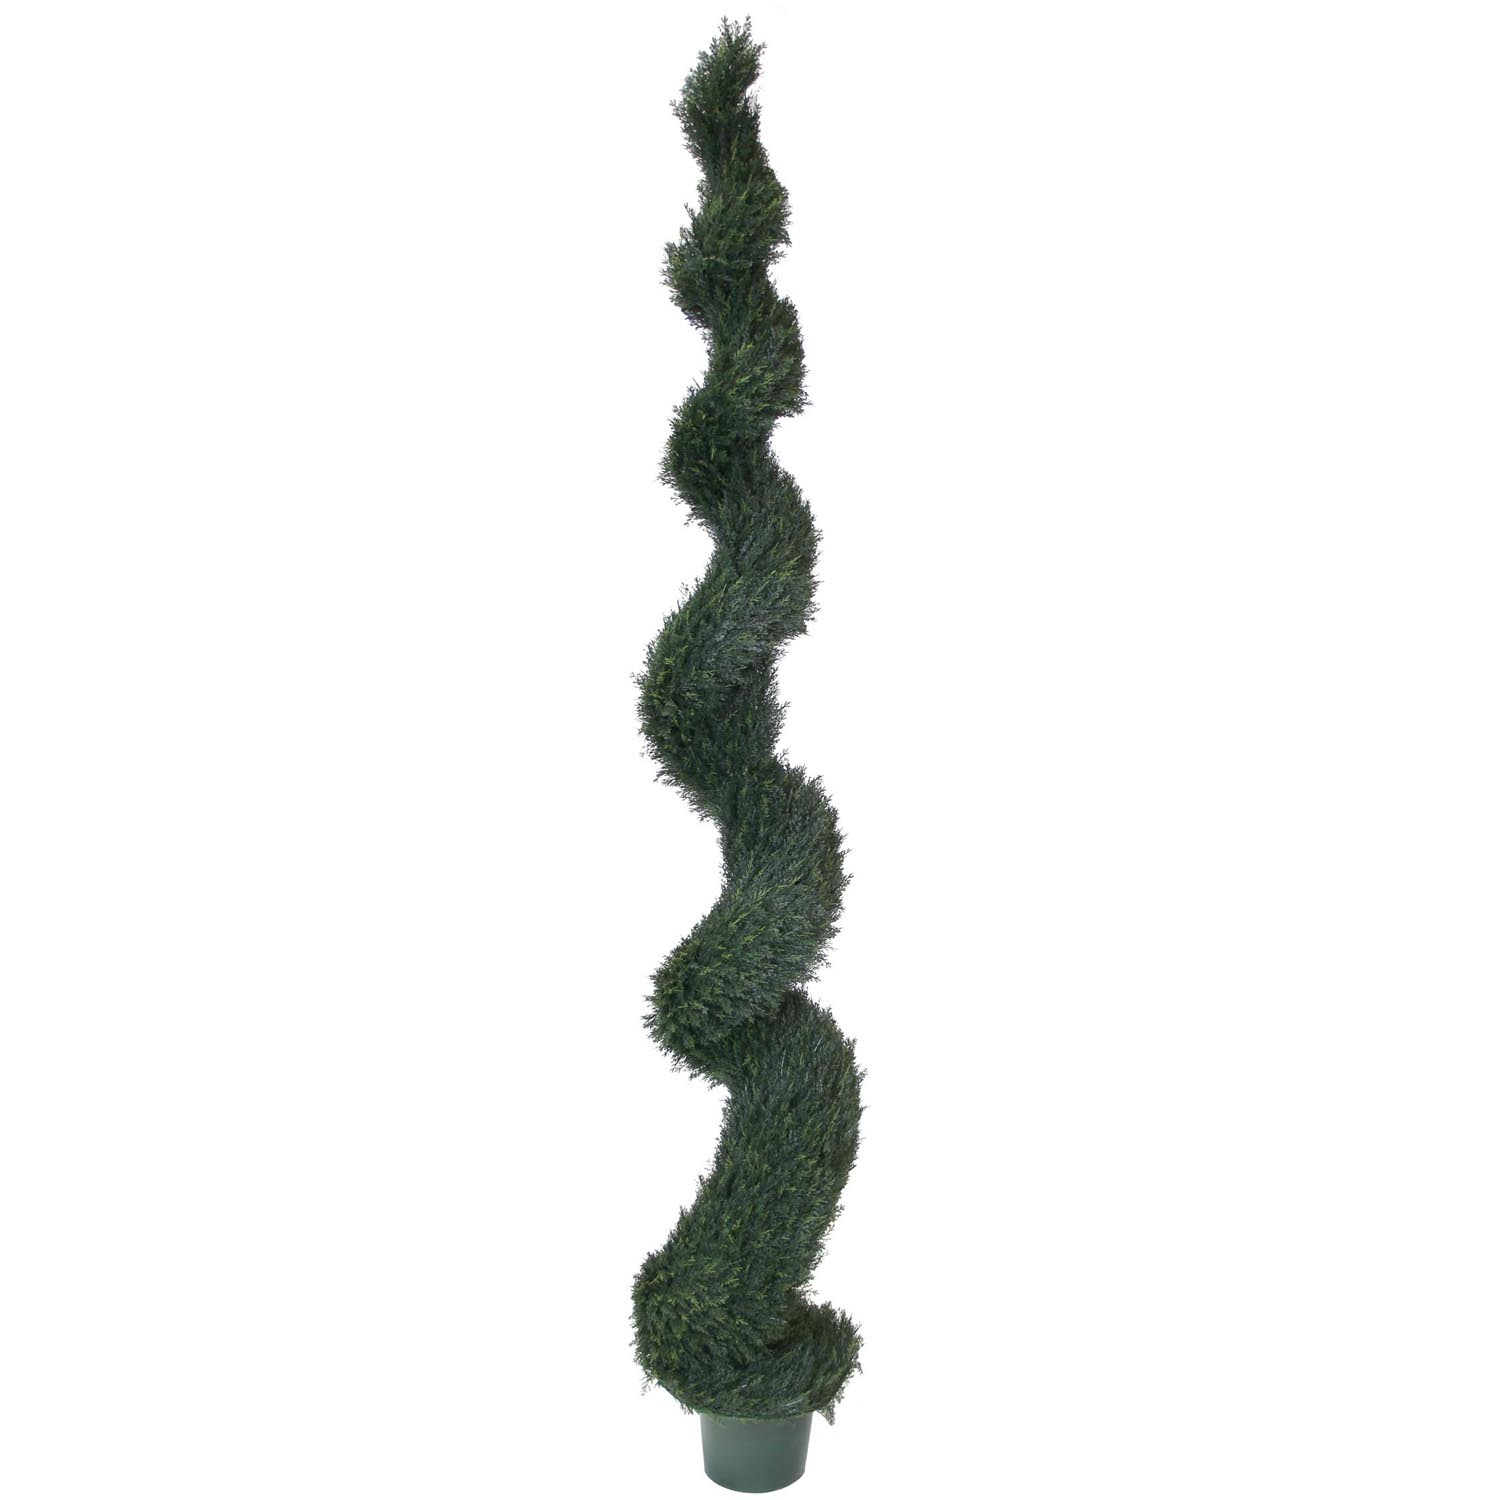 10 foot UV Protected Spiral Pond Cypress Topiary: Potted